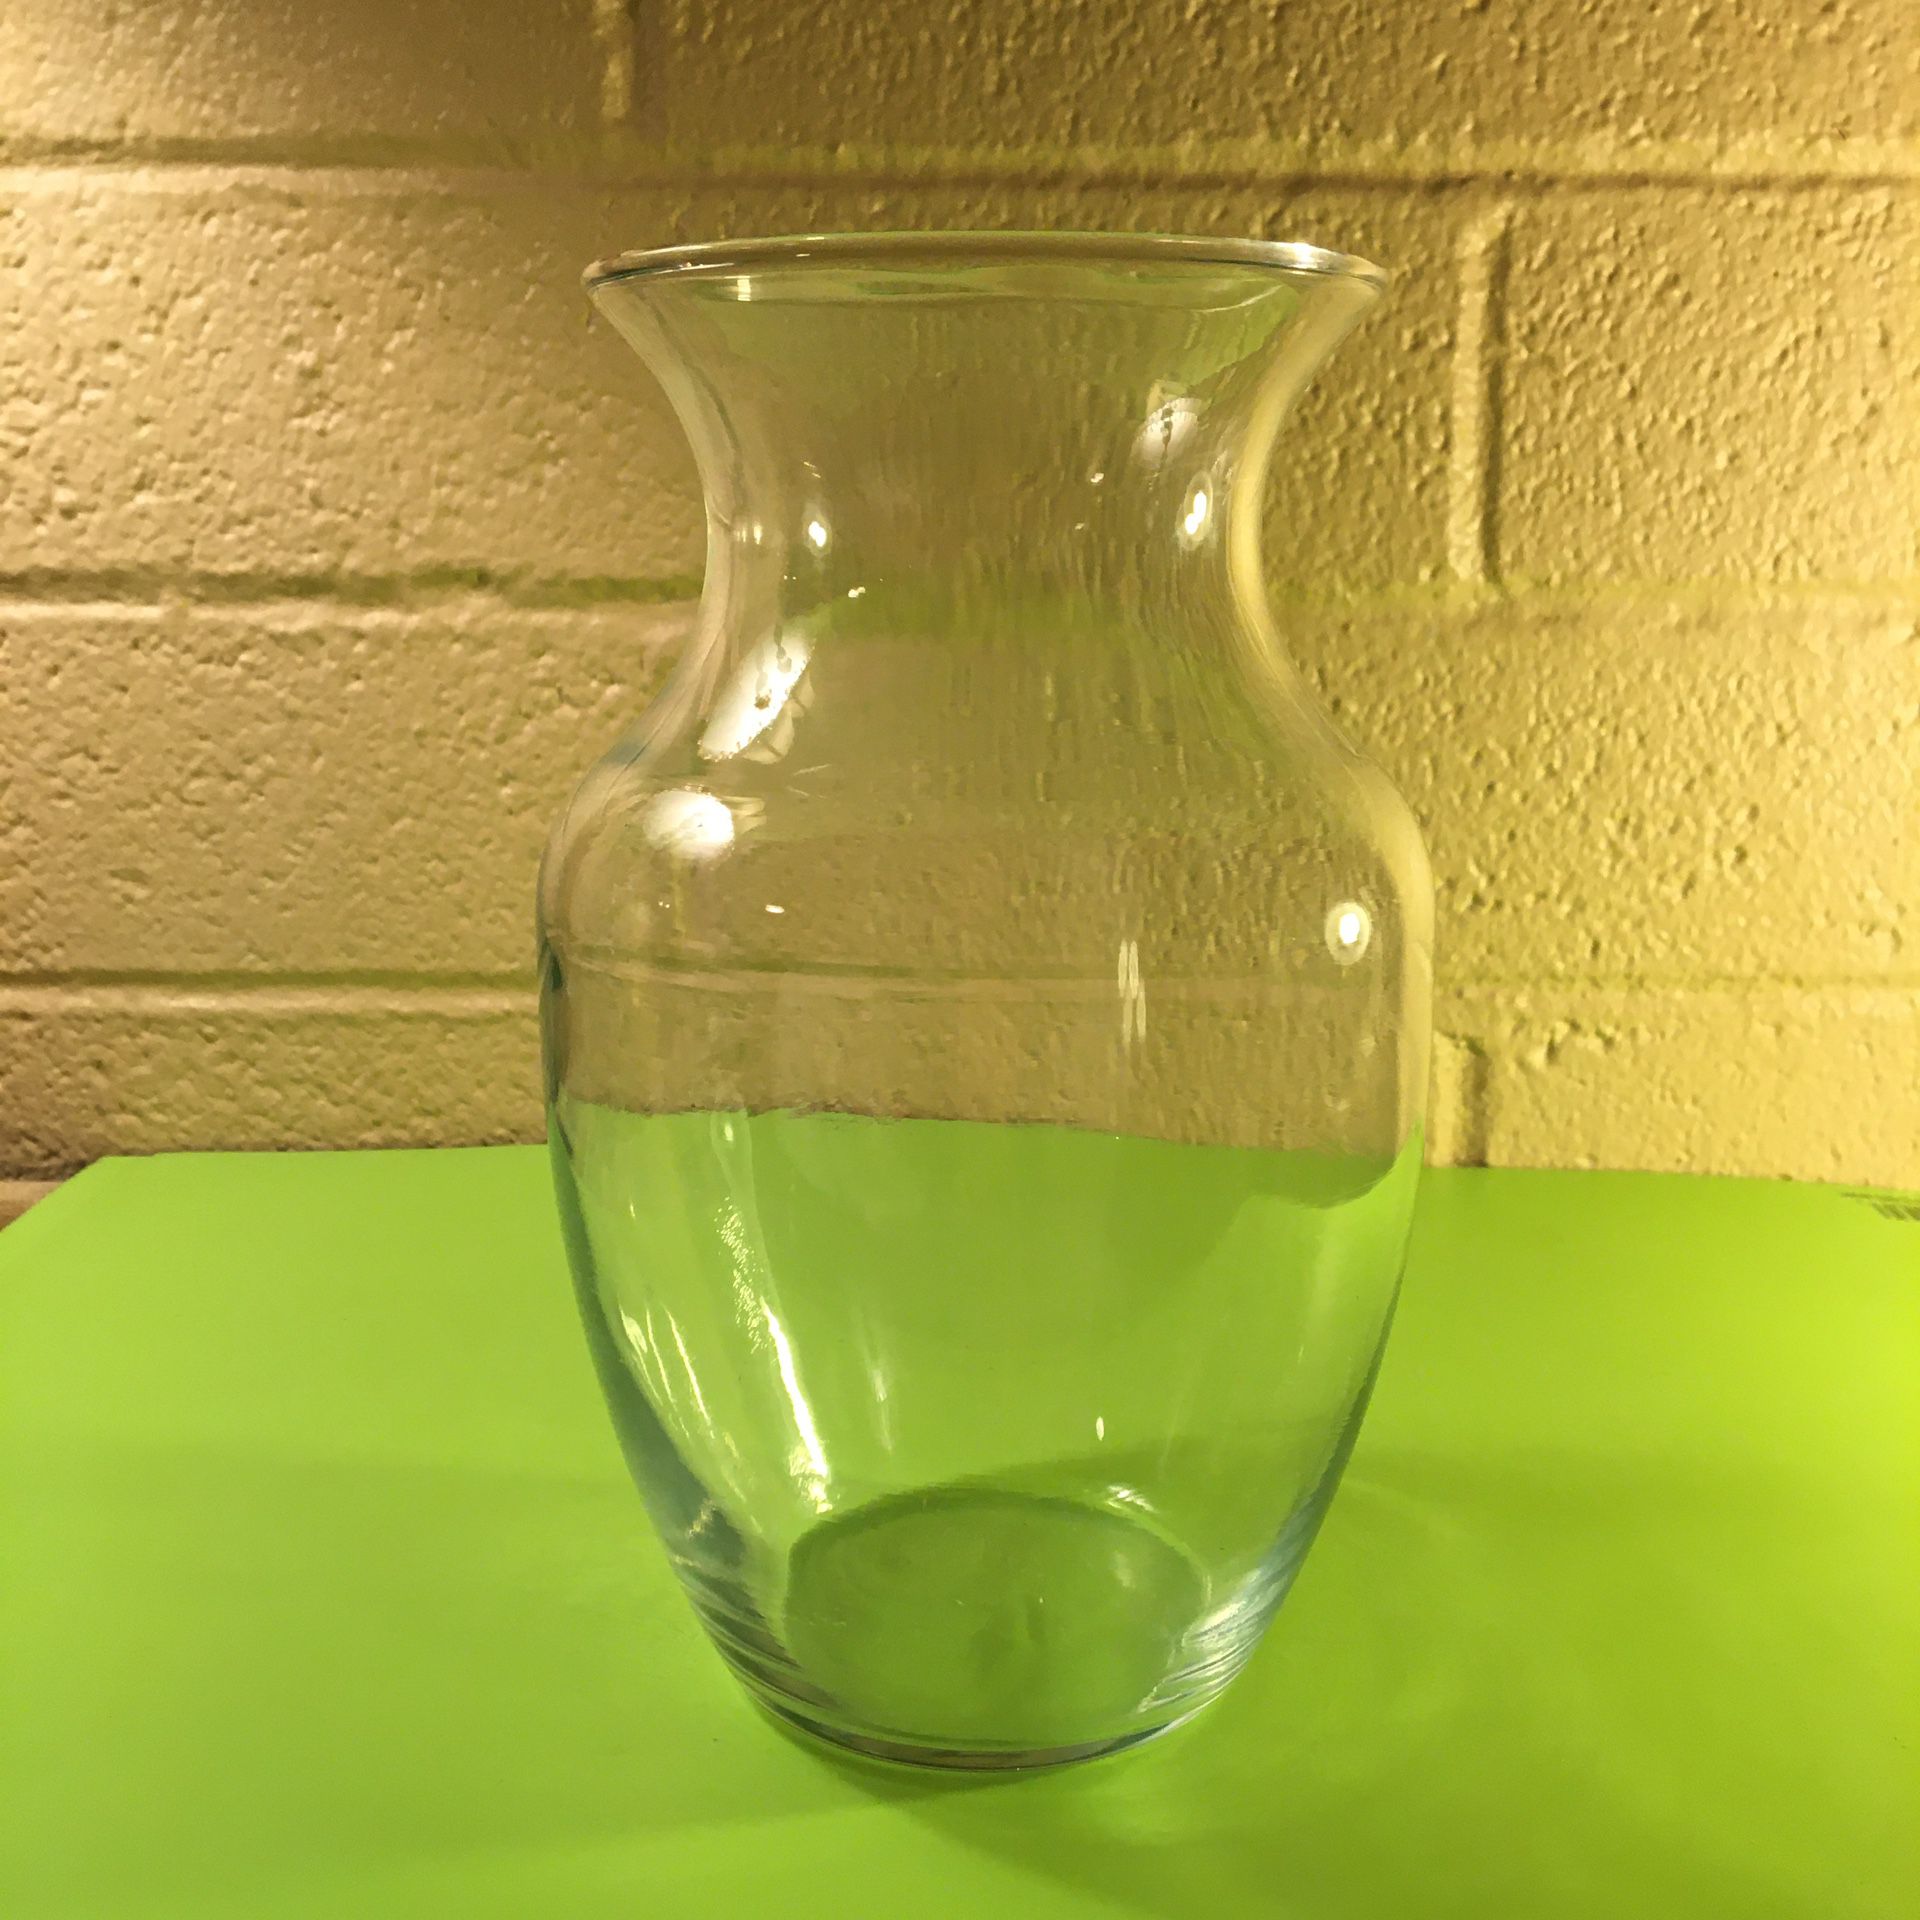 Clear glass vase - 8” tall, 4” diameter at the top